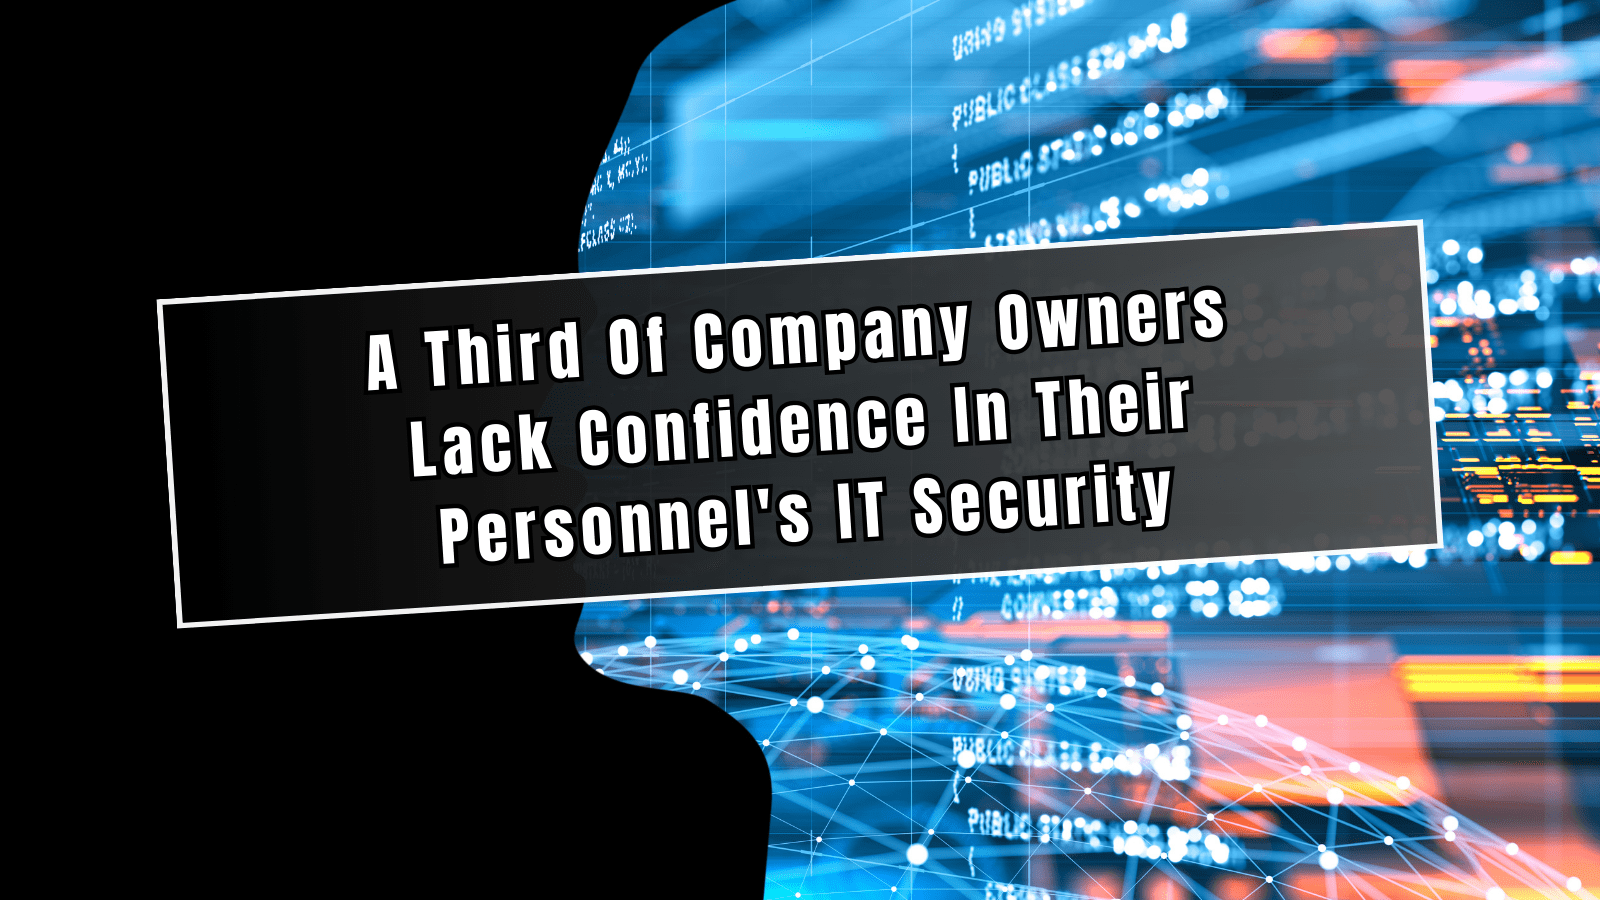 A Third Of Company Owners Lack Confidence In Their Personnels IT Security